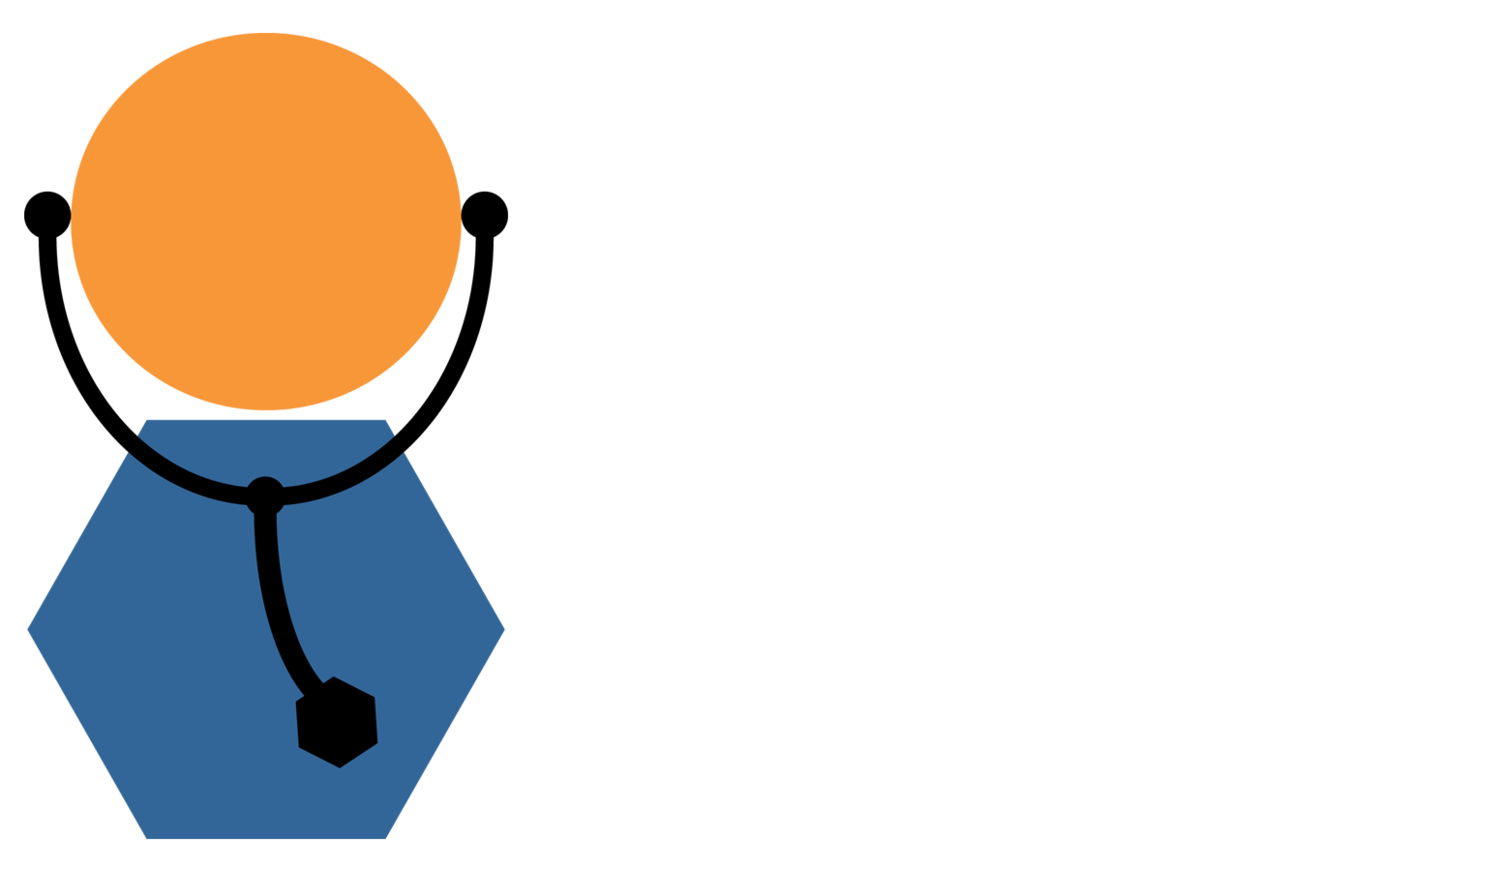 Primary Care Clinic of North Texas